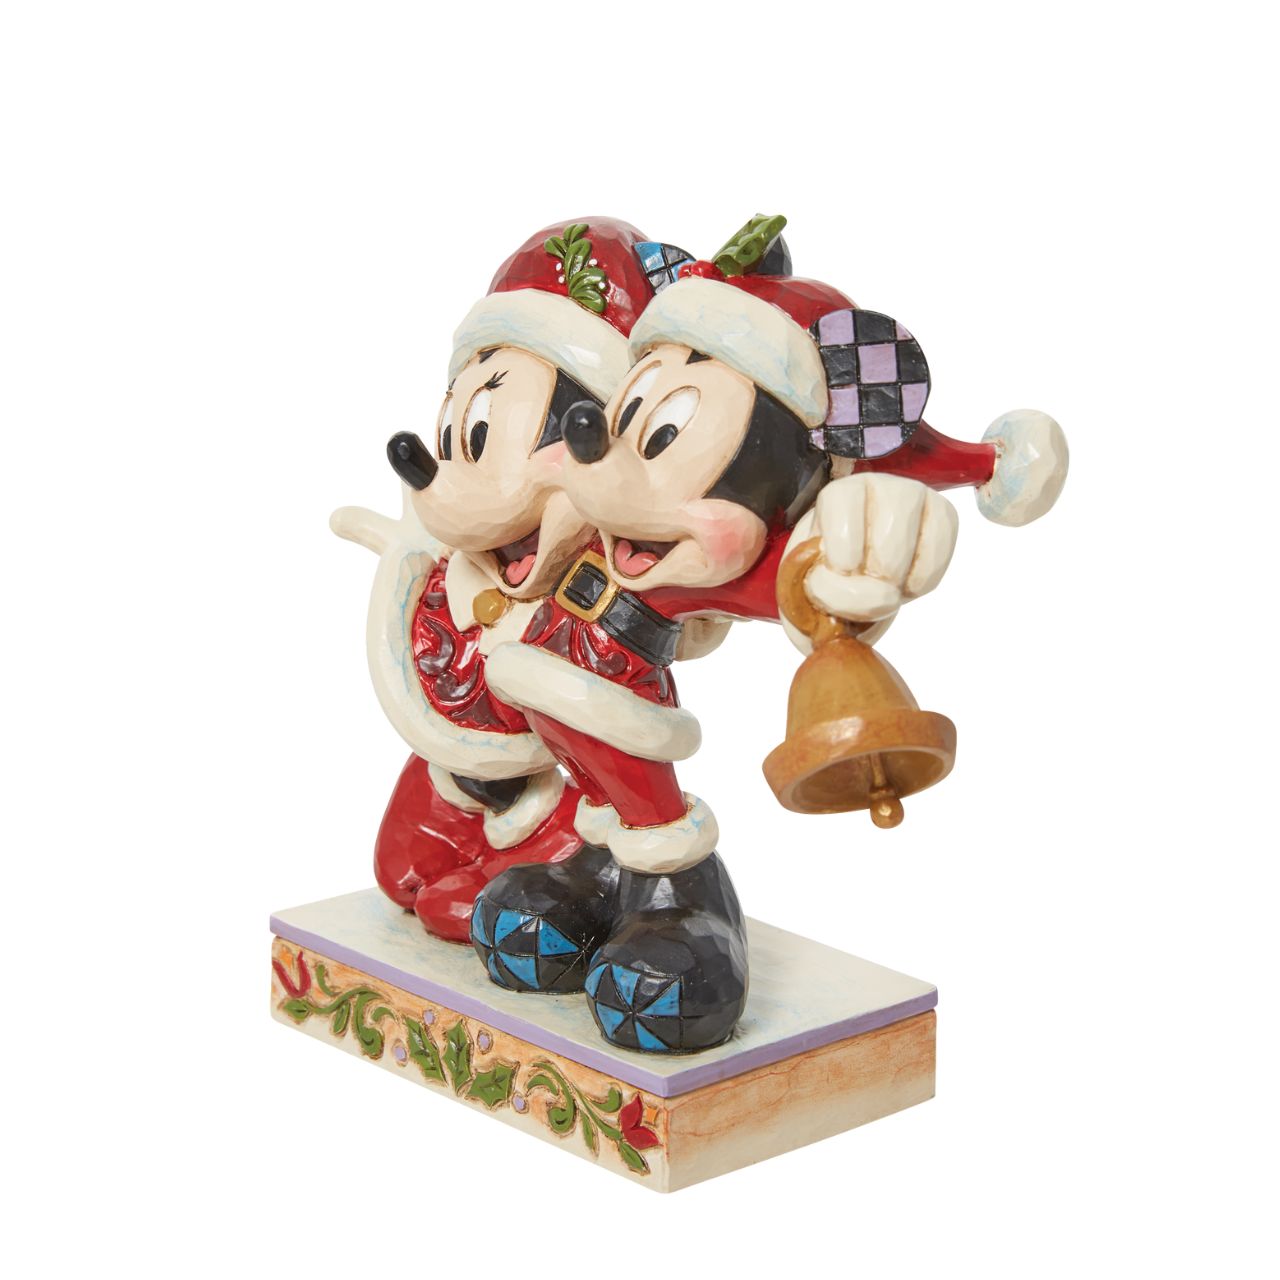 Disney Mickey & Minnie Mouse Santa Figurine by Jim Shore  Featuring the iconic couple, Mickey & Minnie Mouse, this festive figurine is the perfect gift for any Disney Fan. Designed by award winning artist Jim Shore, this Christmas inspired piece shows Mickey & Minnie channelling Santa and dressing up as Mr & Mrs Claus.